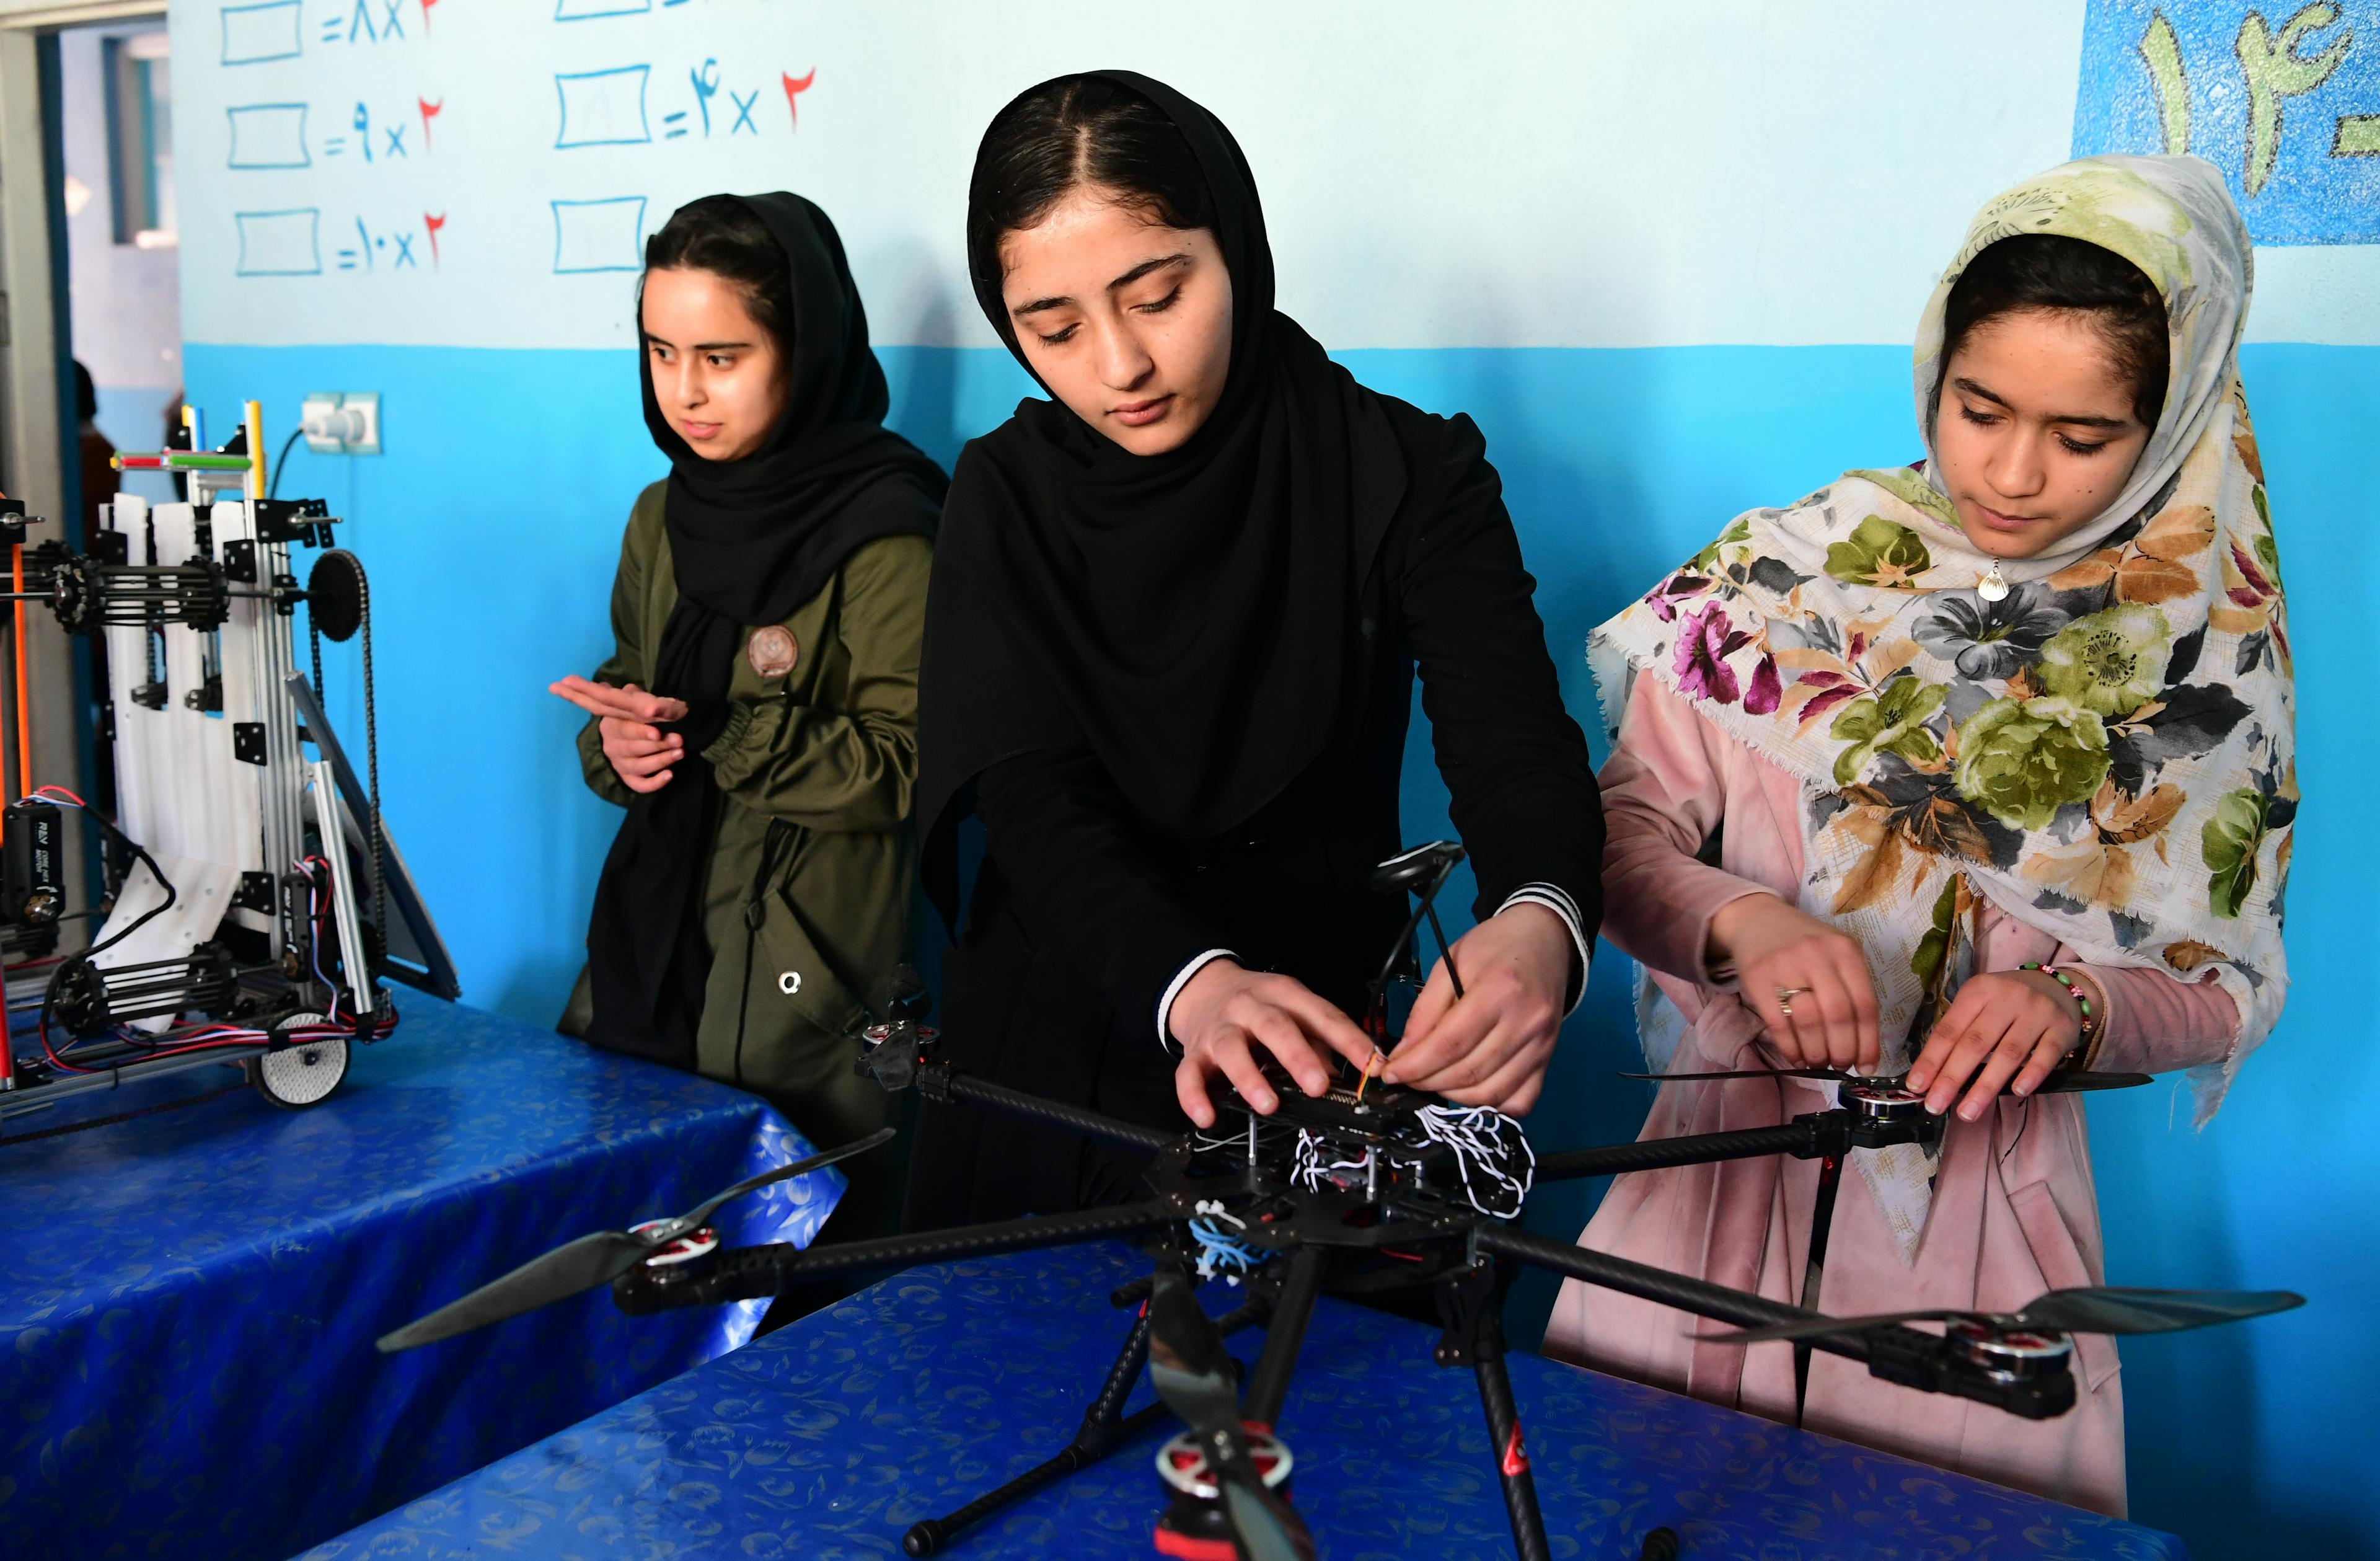 The amazing girls robotic team in Afghanistan. They are Generation Unlimited!